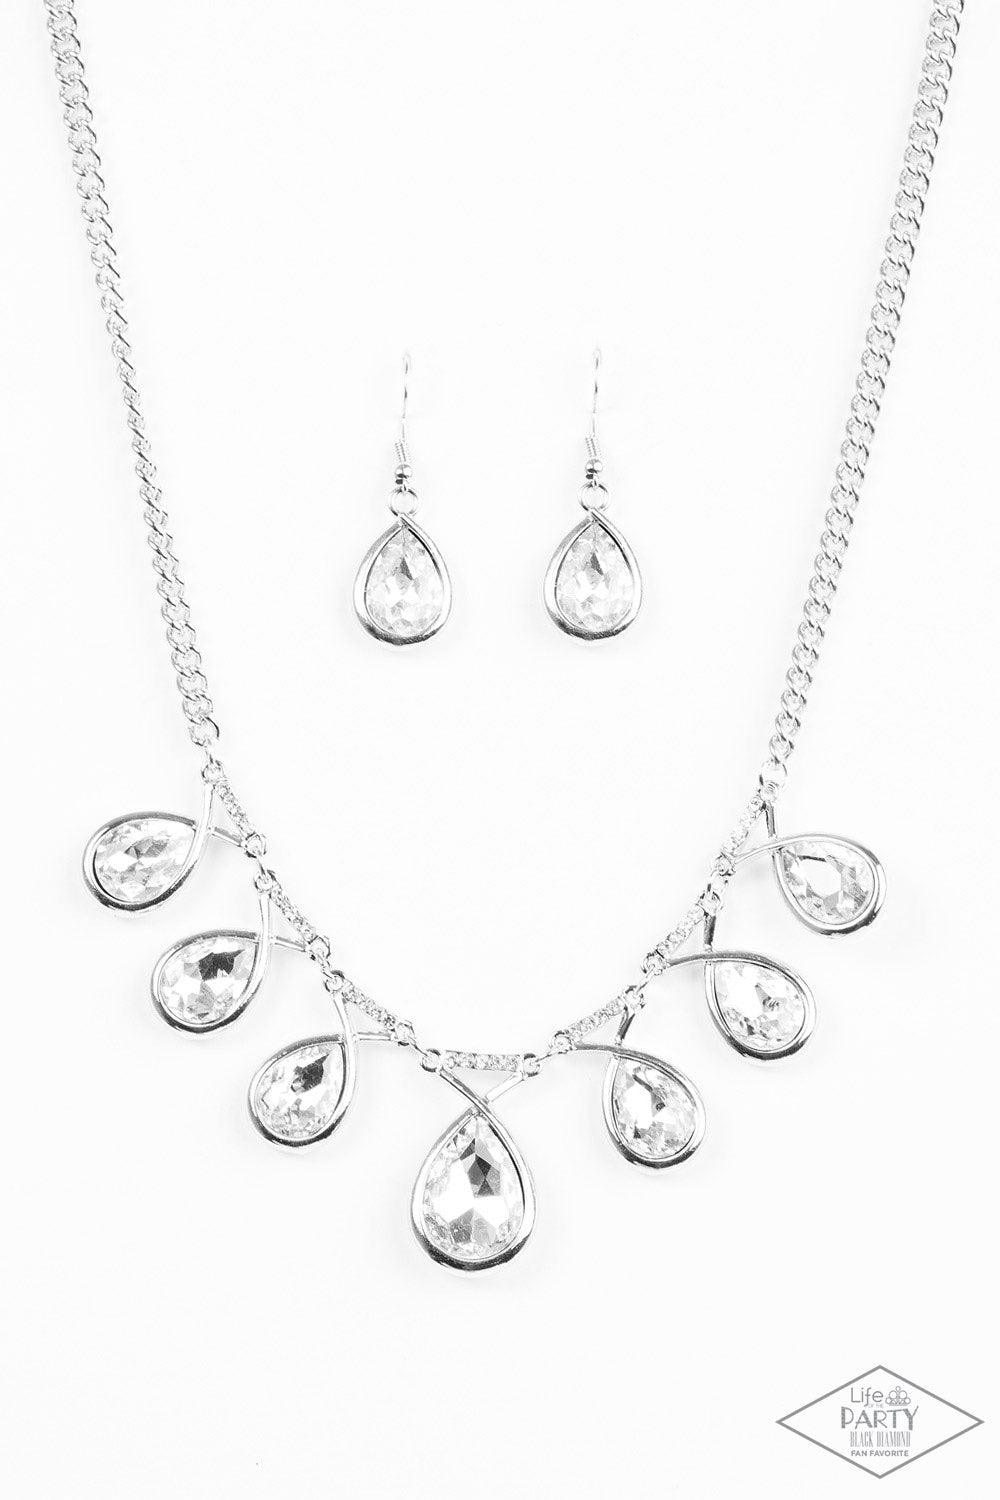 Paparazzi Accessories Love At FIERCE Sight - White Suspended by glittery links, large teardrop gems drip below the collar, creating a dramatic fringe. Swooping silver bars spin around the faceted teardrops, adding a shiny metallic finish to the fierce cen